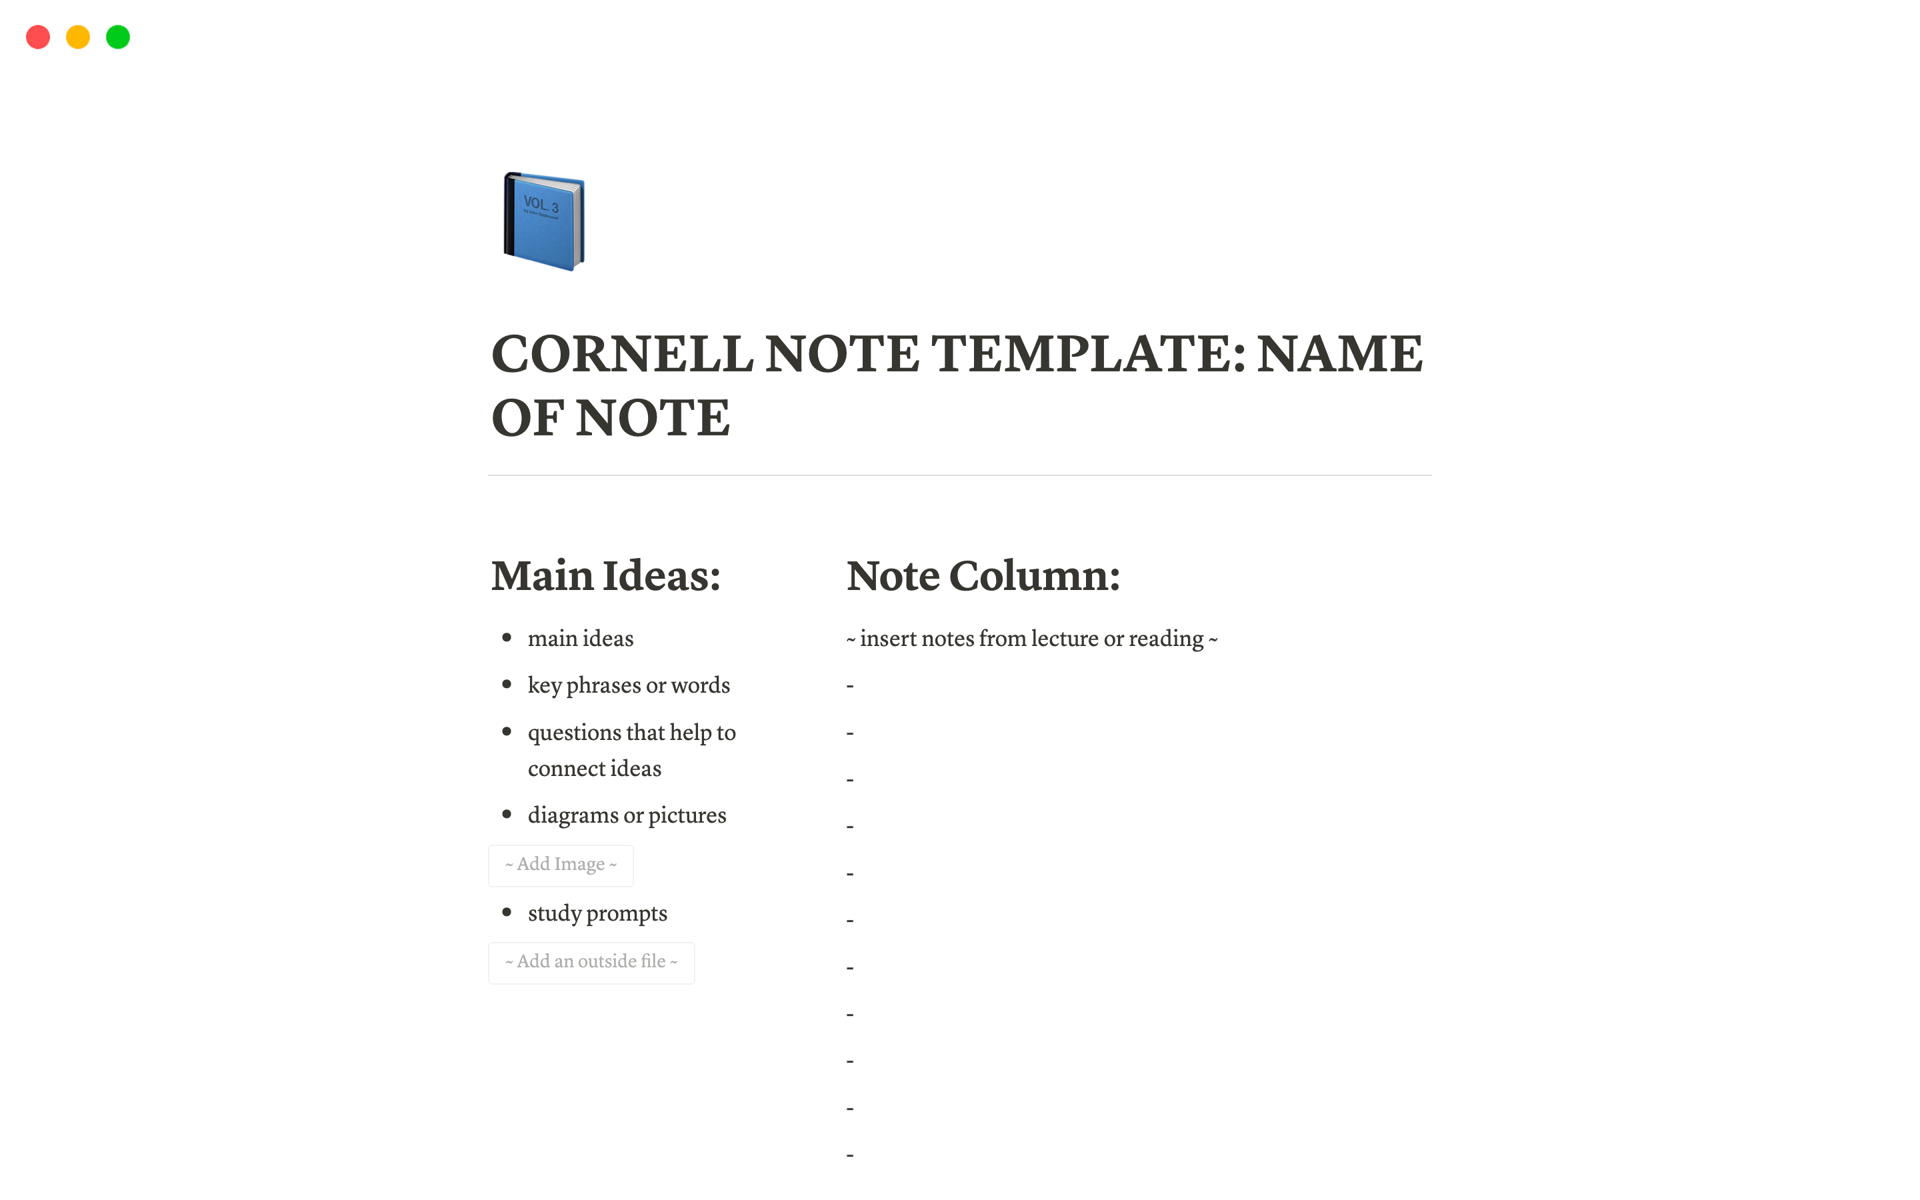 Here is the perfect note taking template for:
College students
Grad students
Middle School students
Book Readers
Teachers 
ect.
This template includes AI.